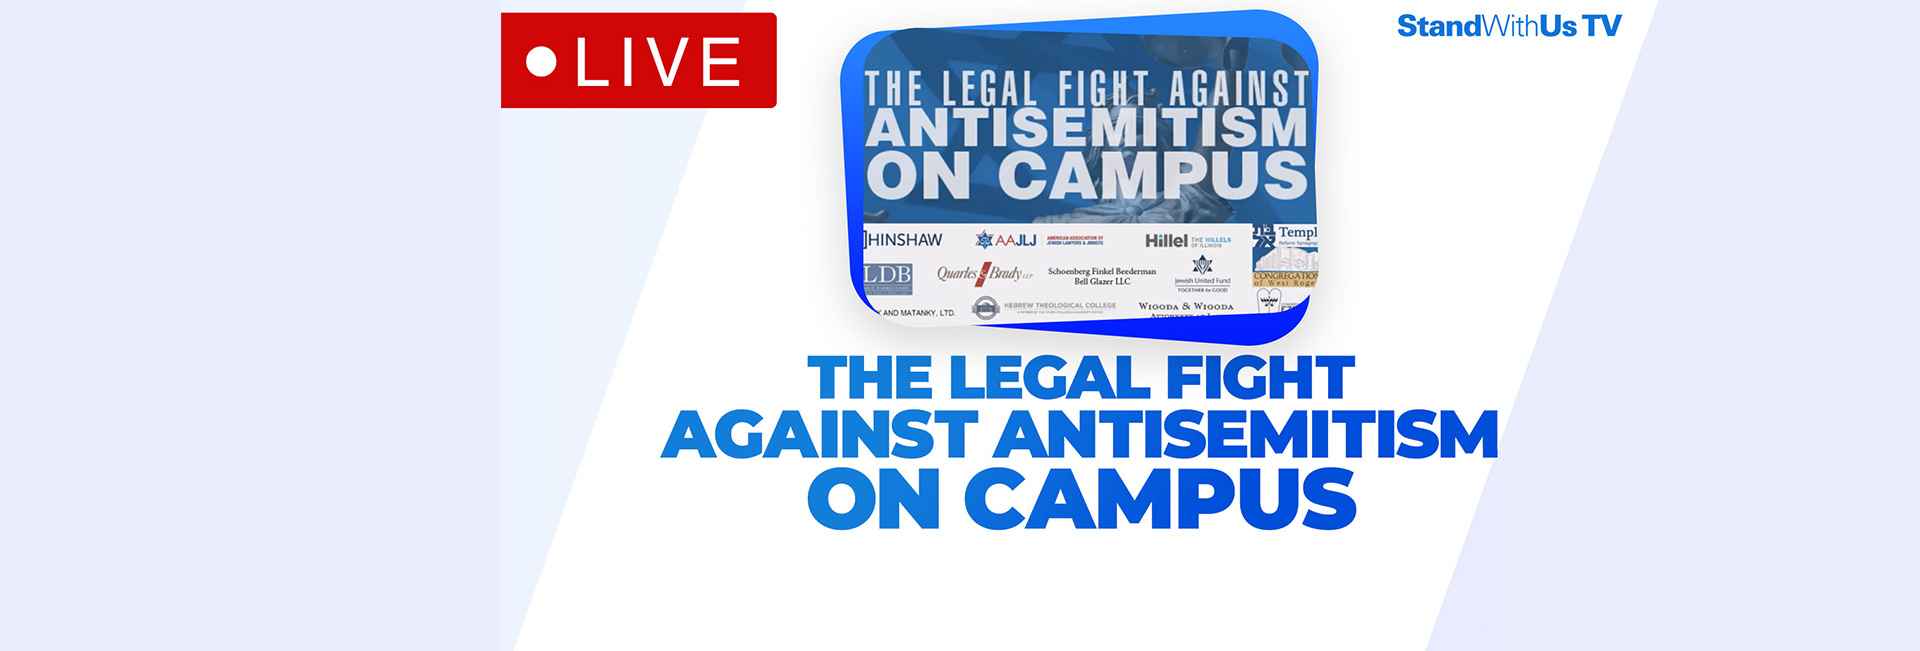 The Legal Fight Against Antisemitism on Campus